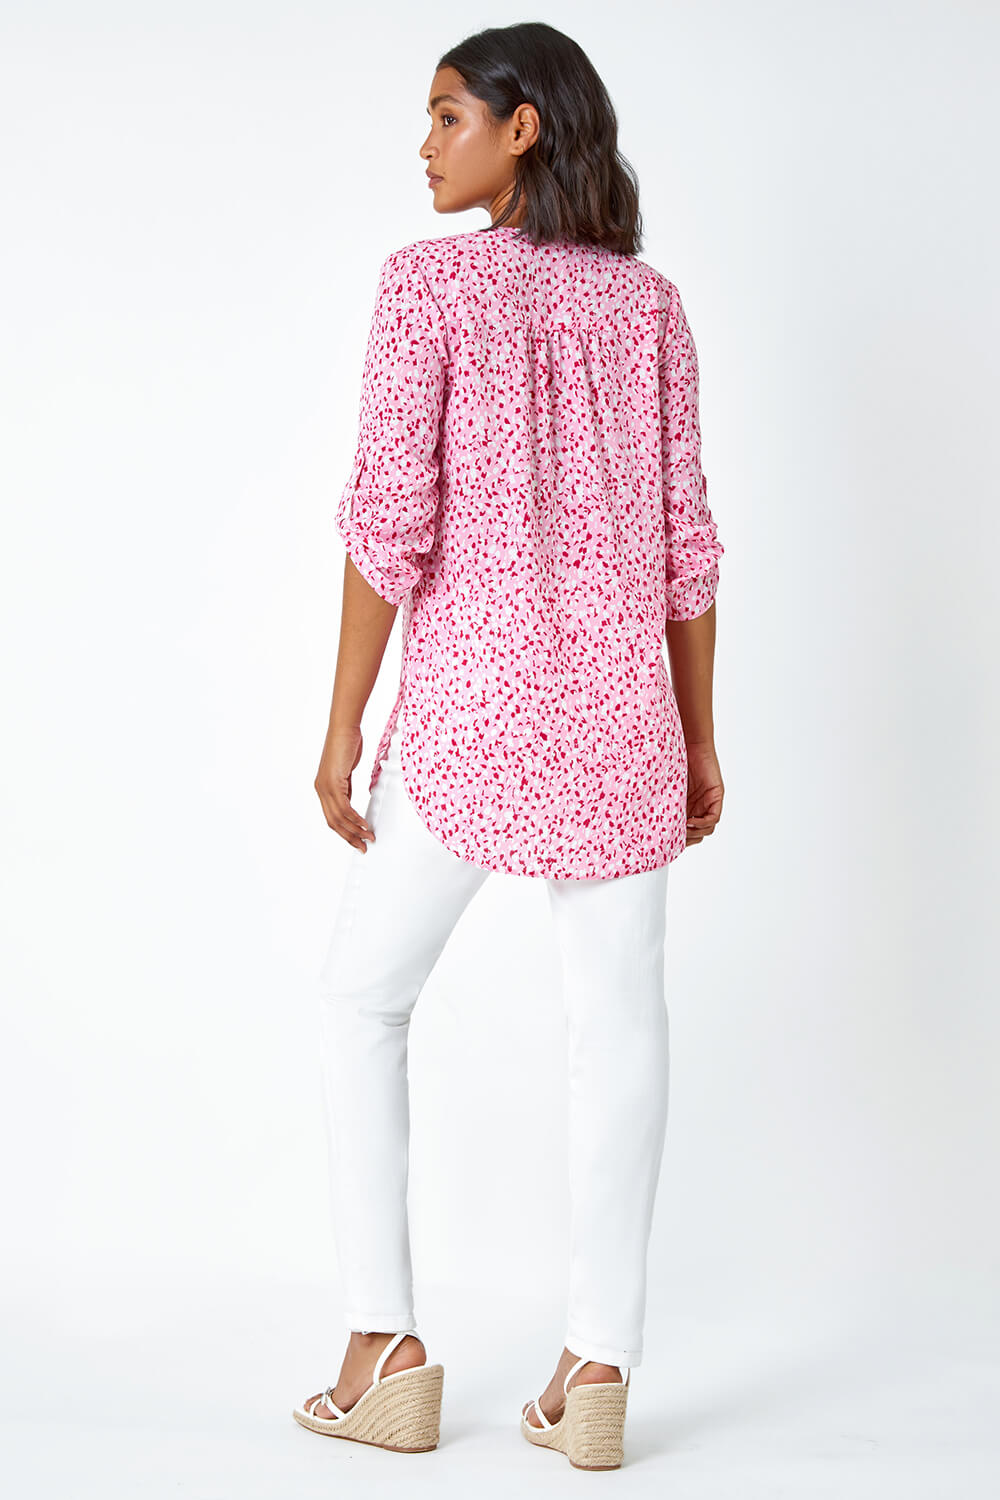 PINK Ditsy Print Button Up Blouse, Image 3 of 5